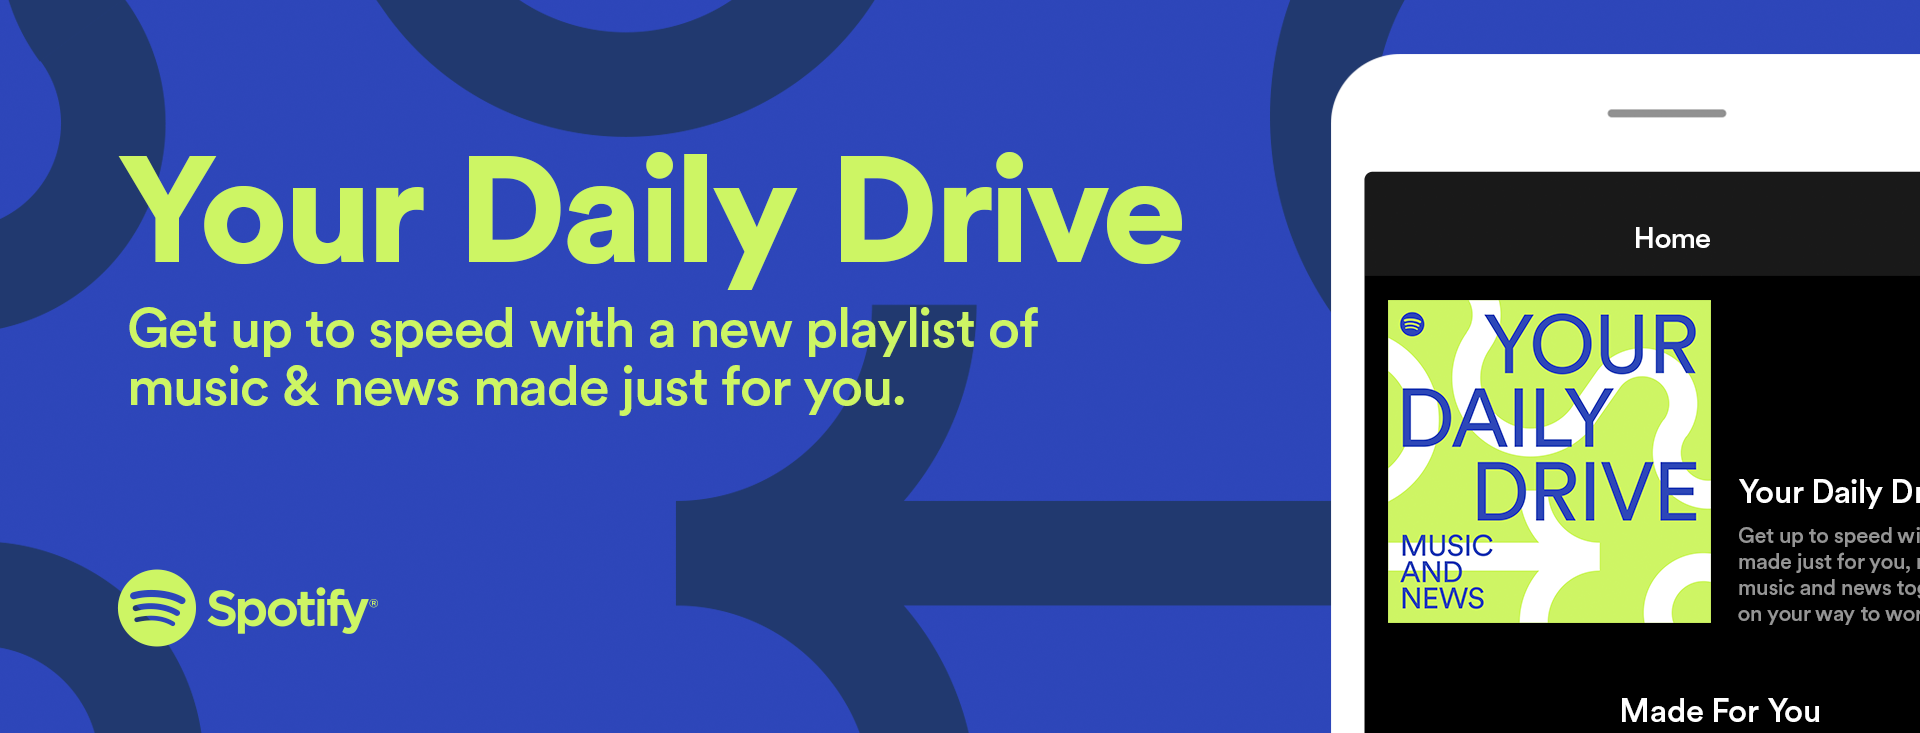 Spotify’s new radio-style playlist combines music and news in U.K.